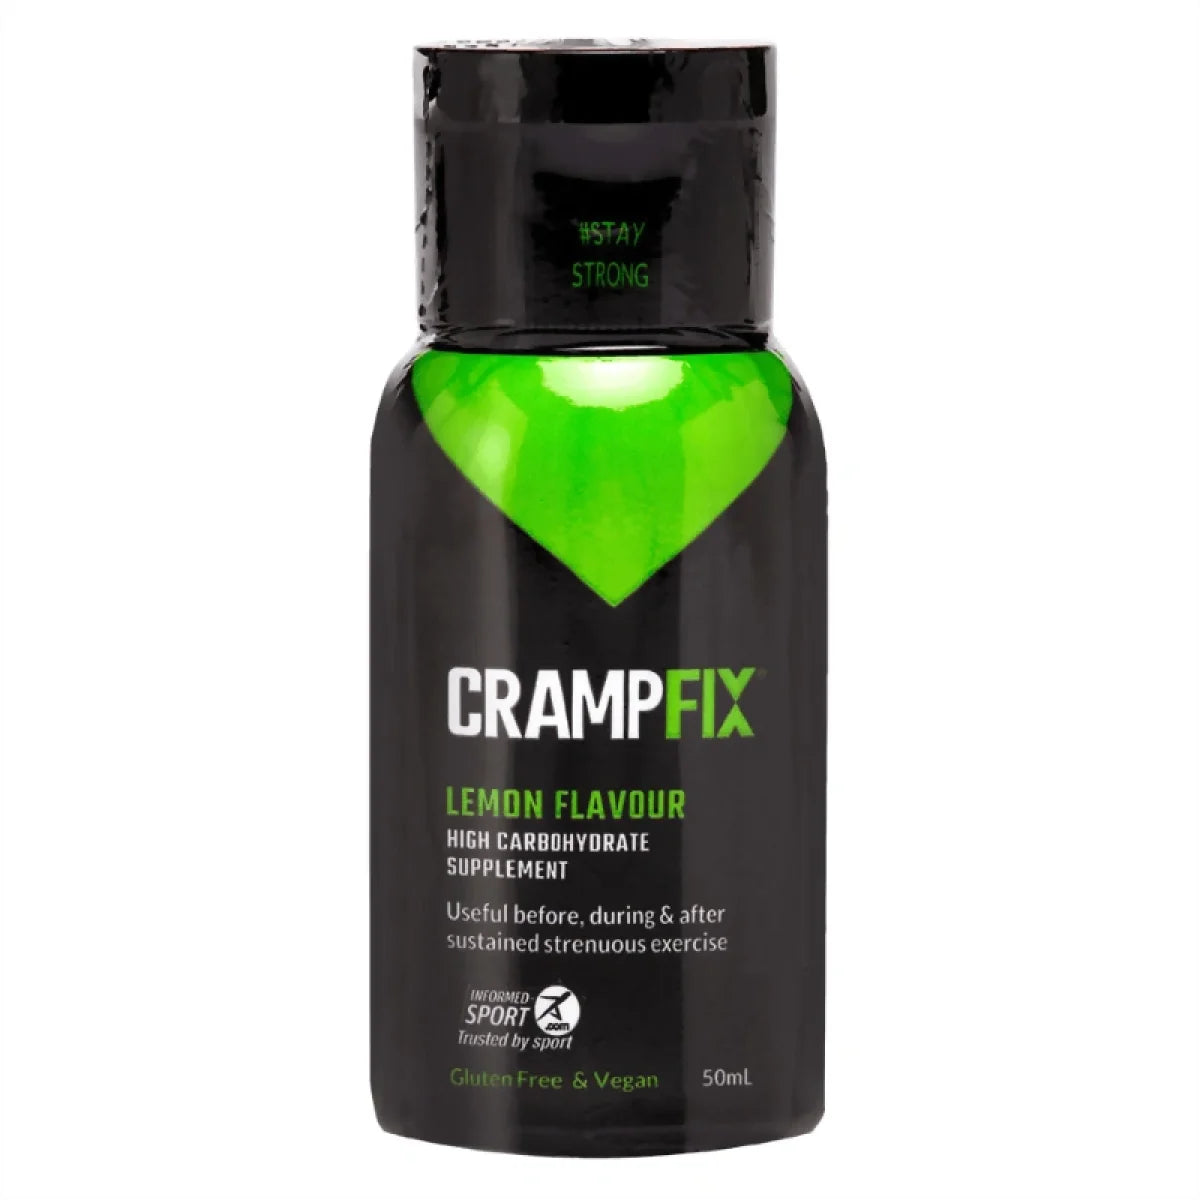 CrampFix High Carbohydrate Supplement